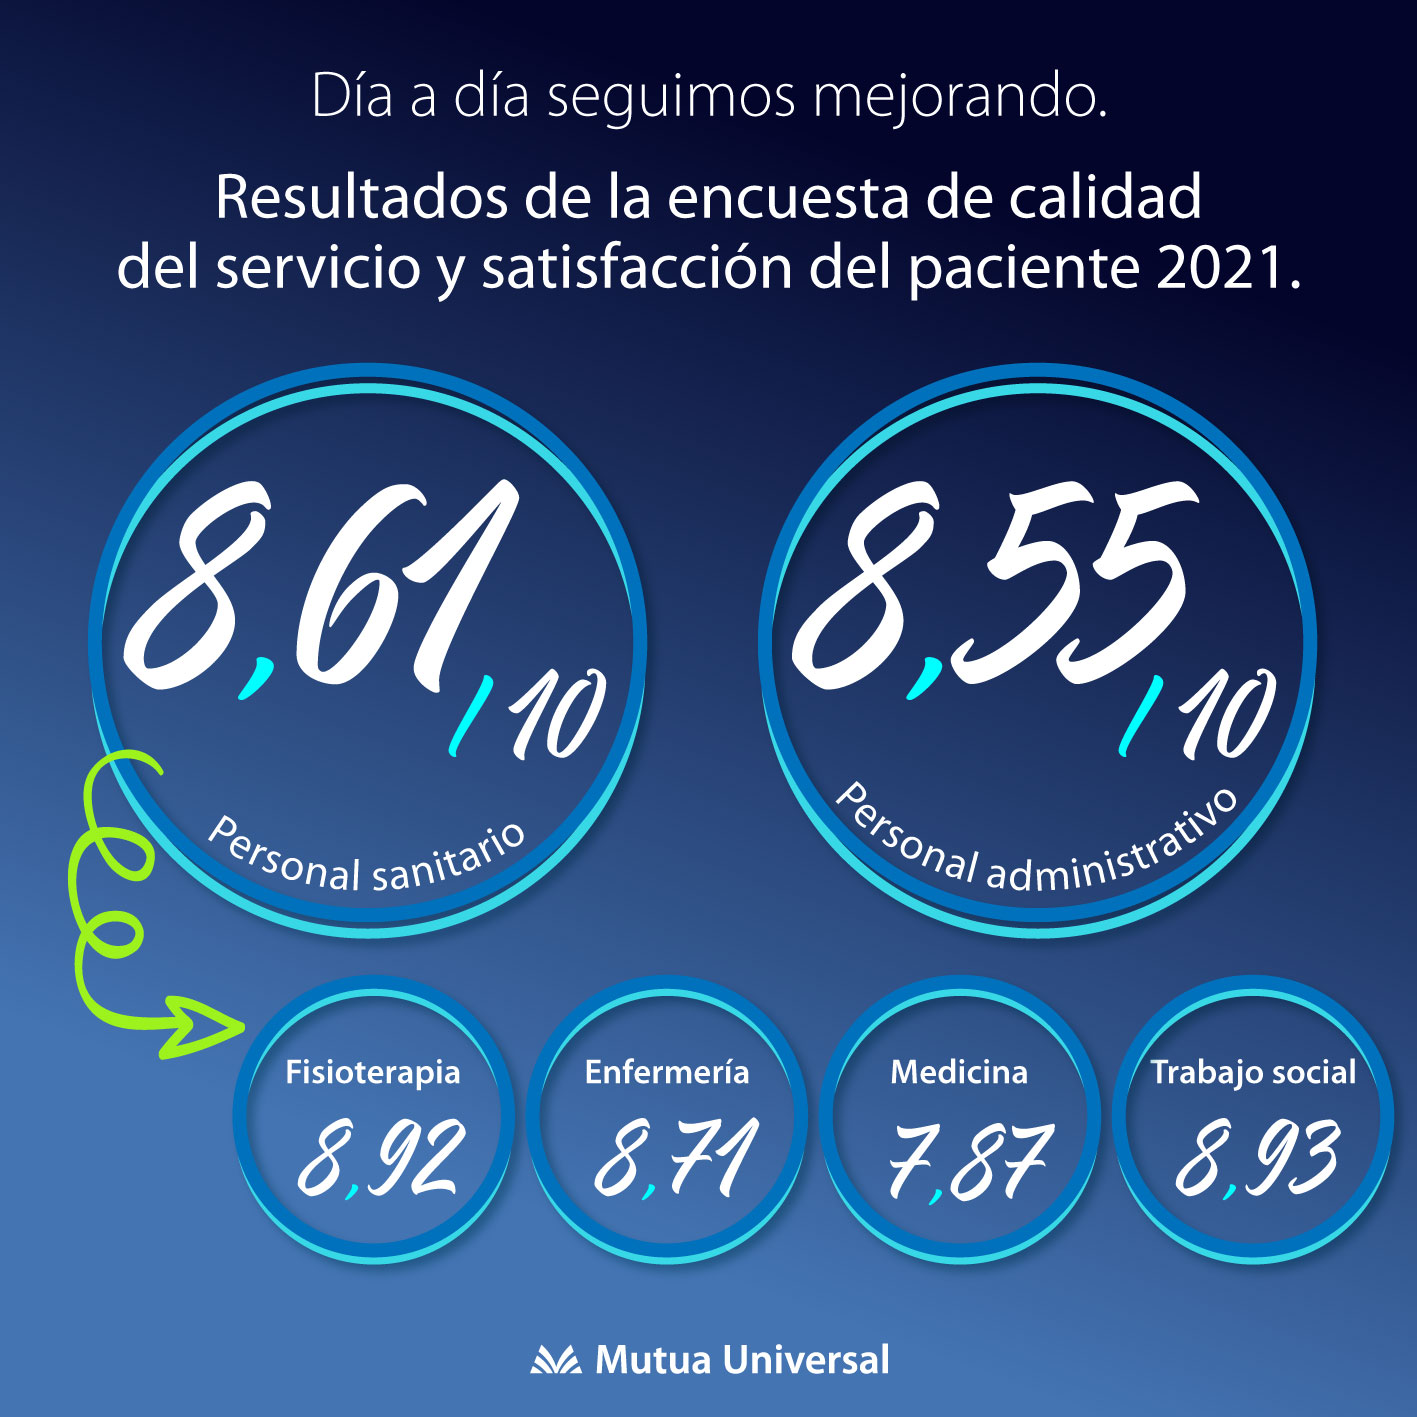 Assessment of the service survey 2021